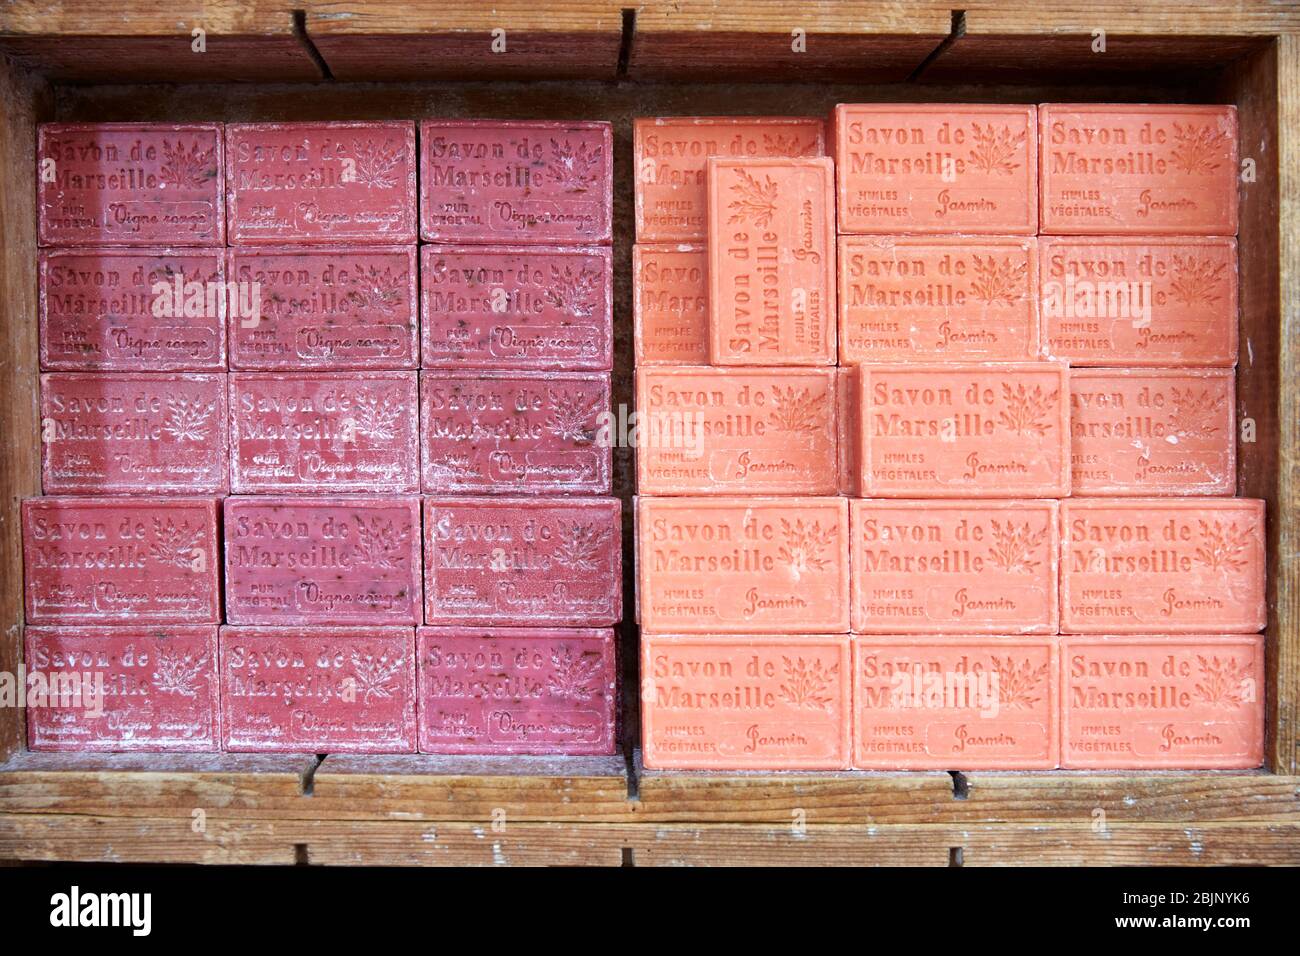 Blocks of coloured soaps stacked on shelves, Provence, France. Stock Photo